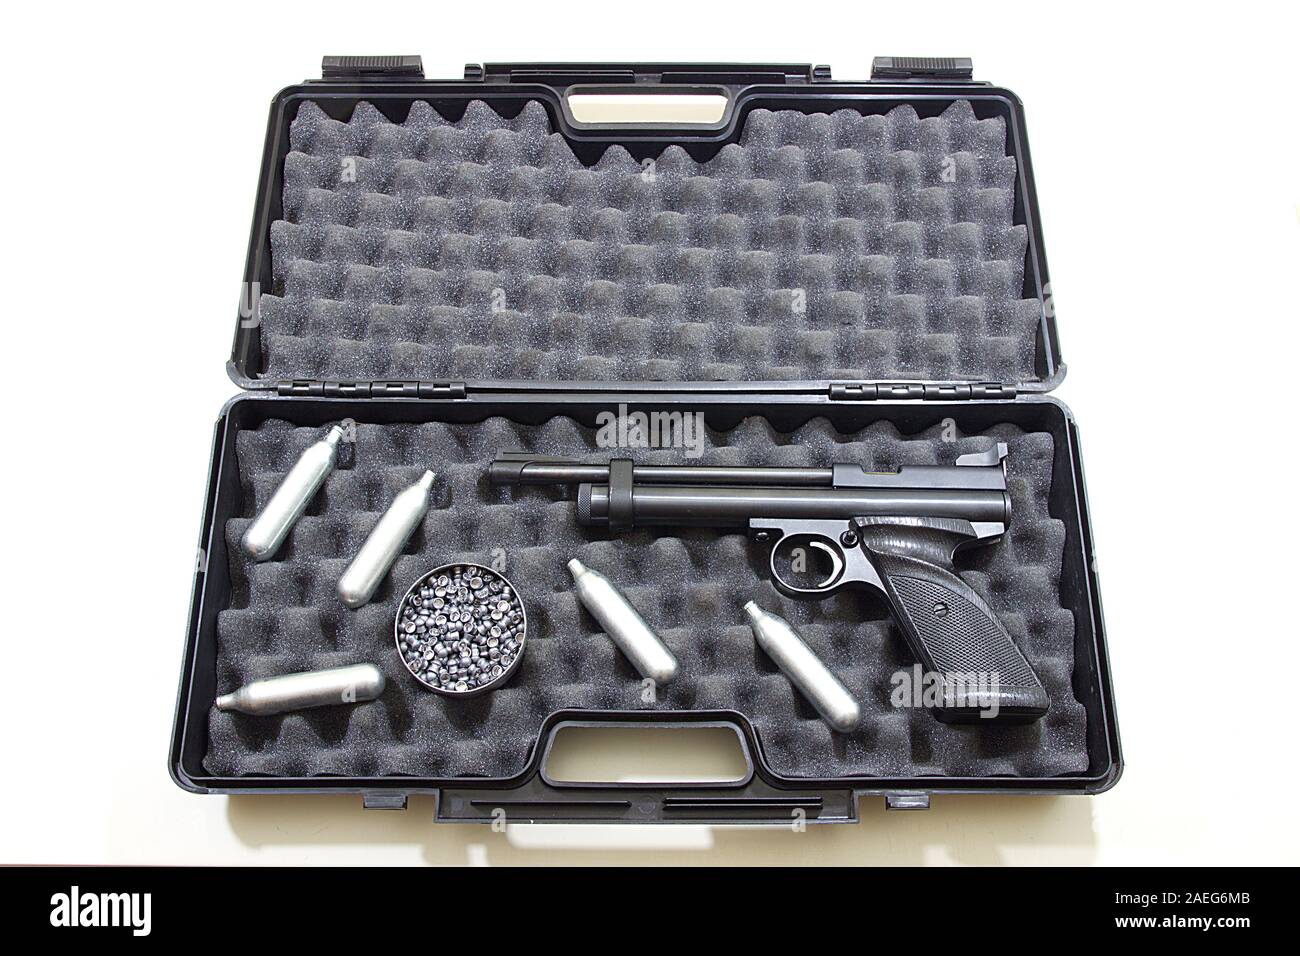 Air gun pistol in a plastic hard pistol case with round box of lead pellets and capsules of 12 grams CO2 gas. Top view, isolated on white background Stock Photo